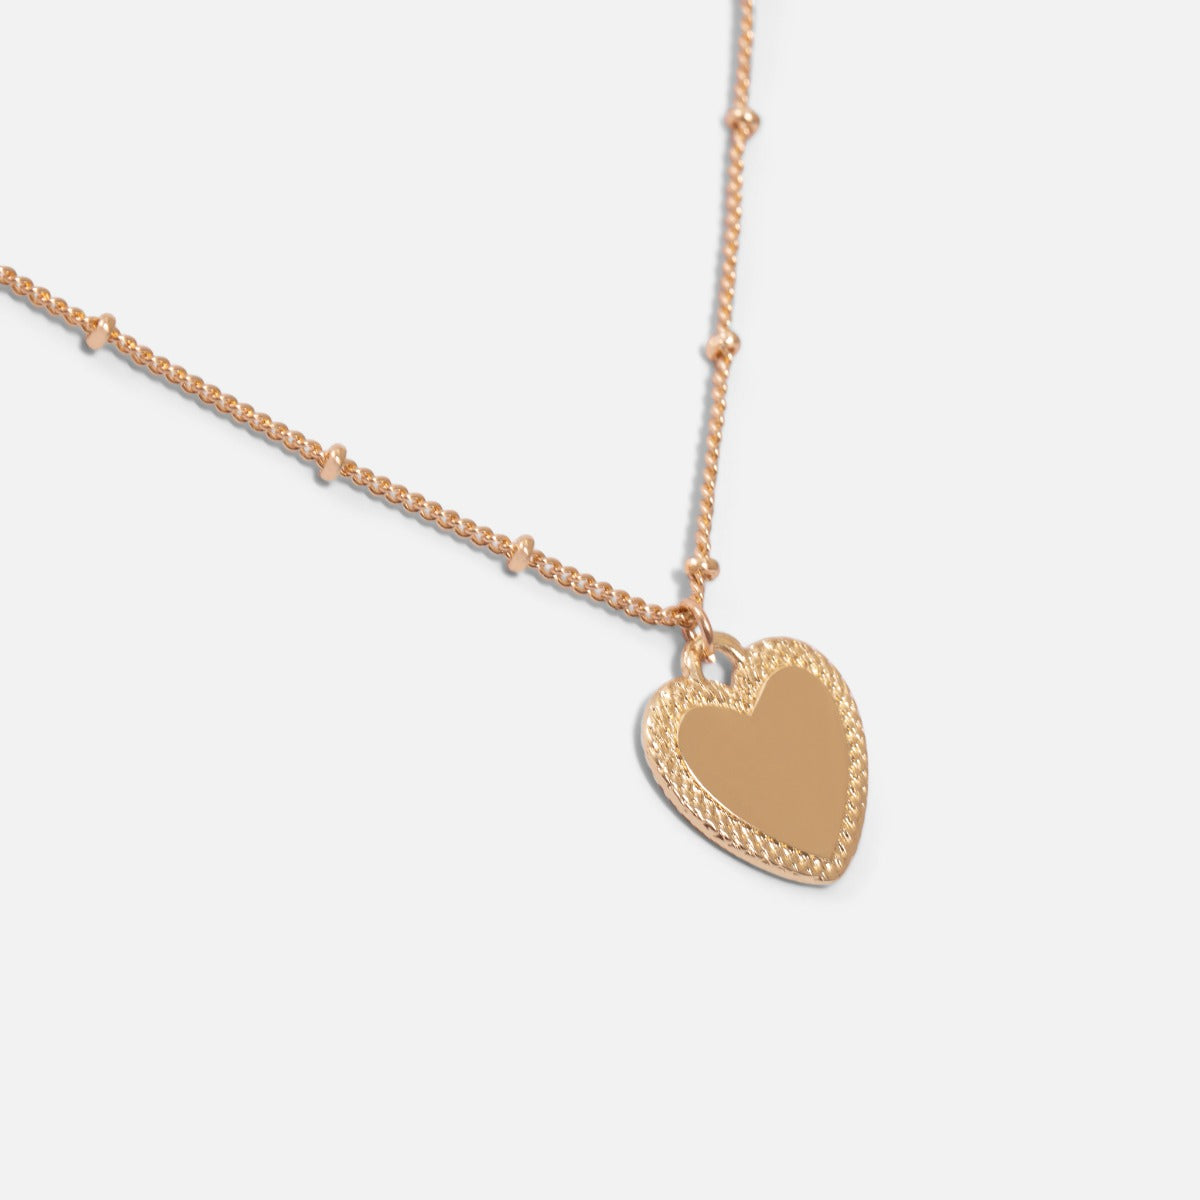 Golden pendant with small heart charm